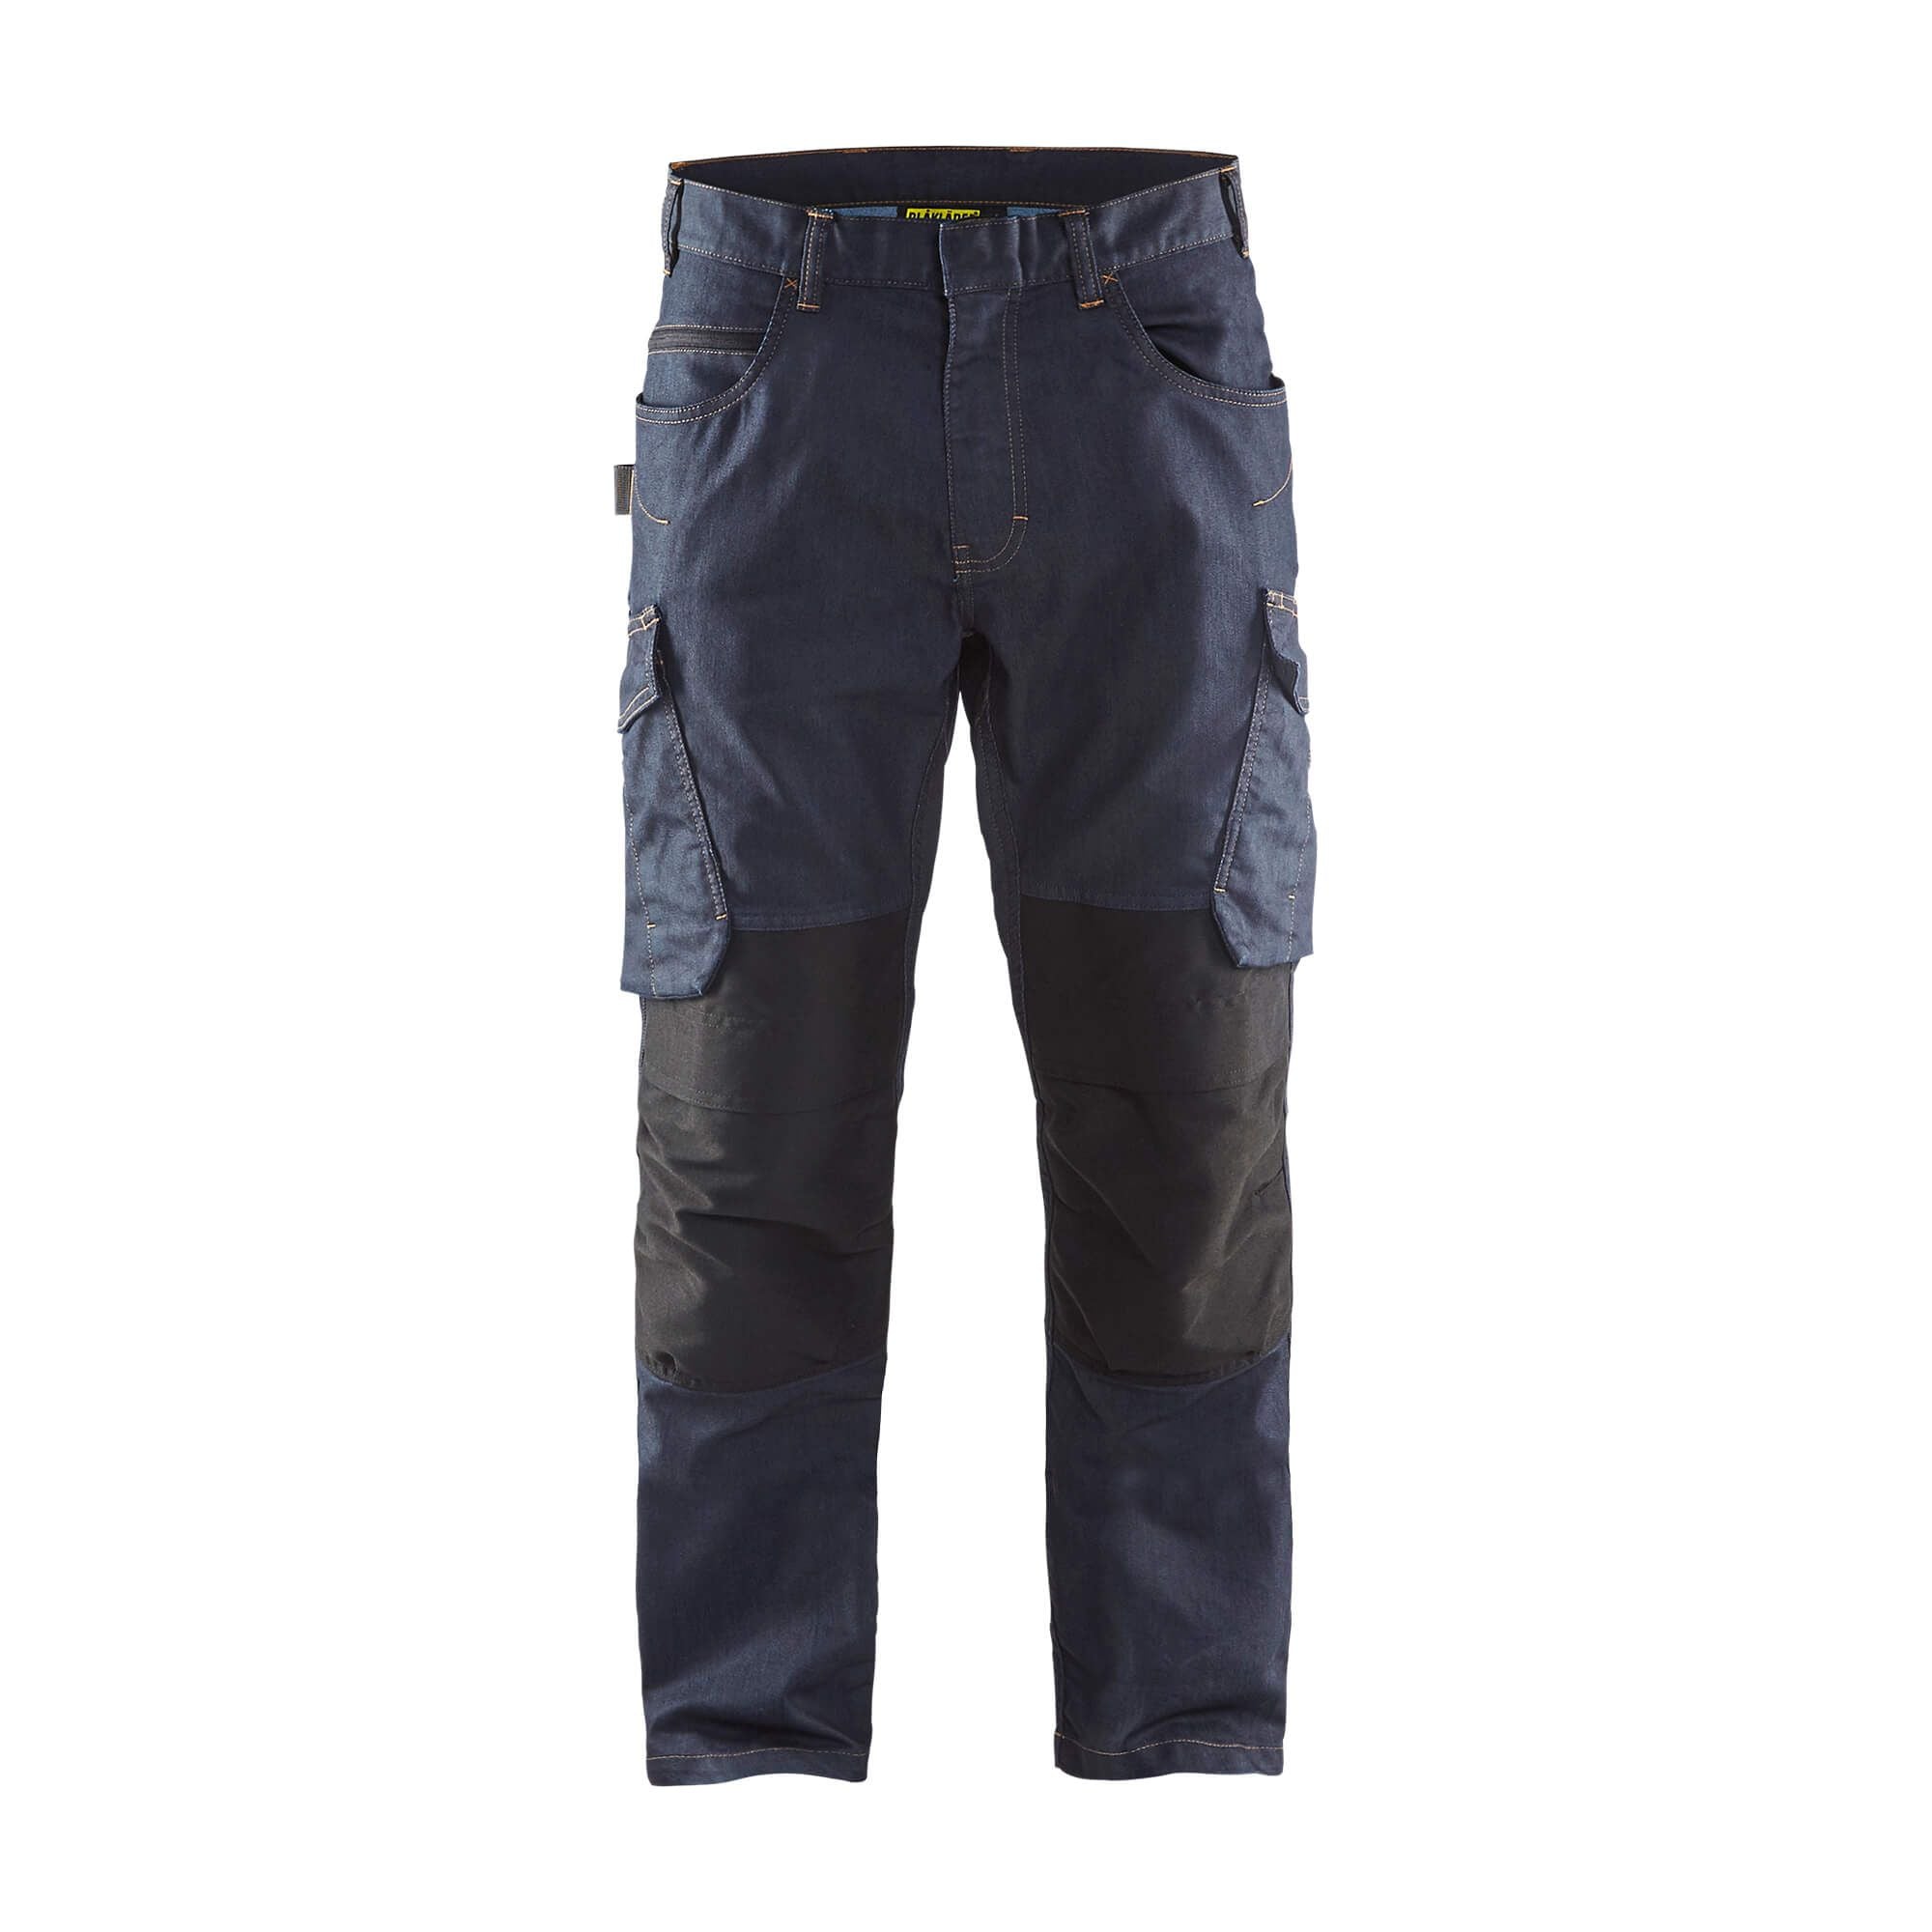 Work Trousers with Knee Pads  Diadora Utility Online Shop